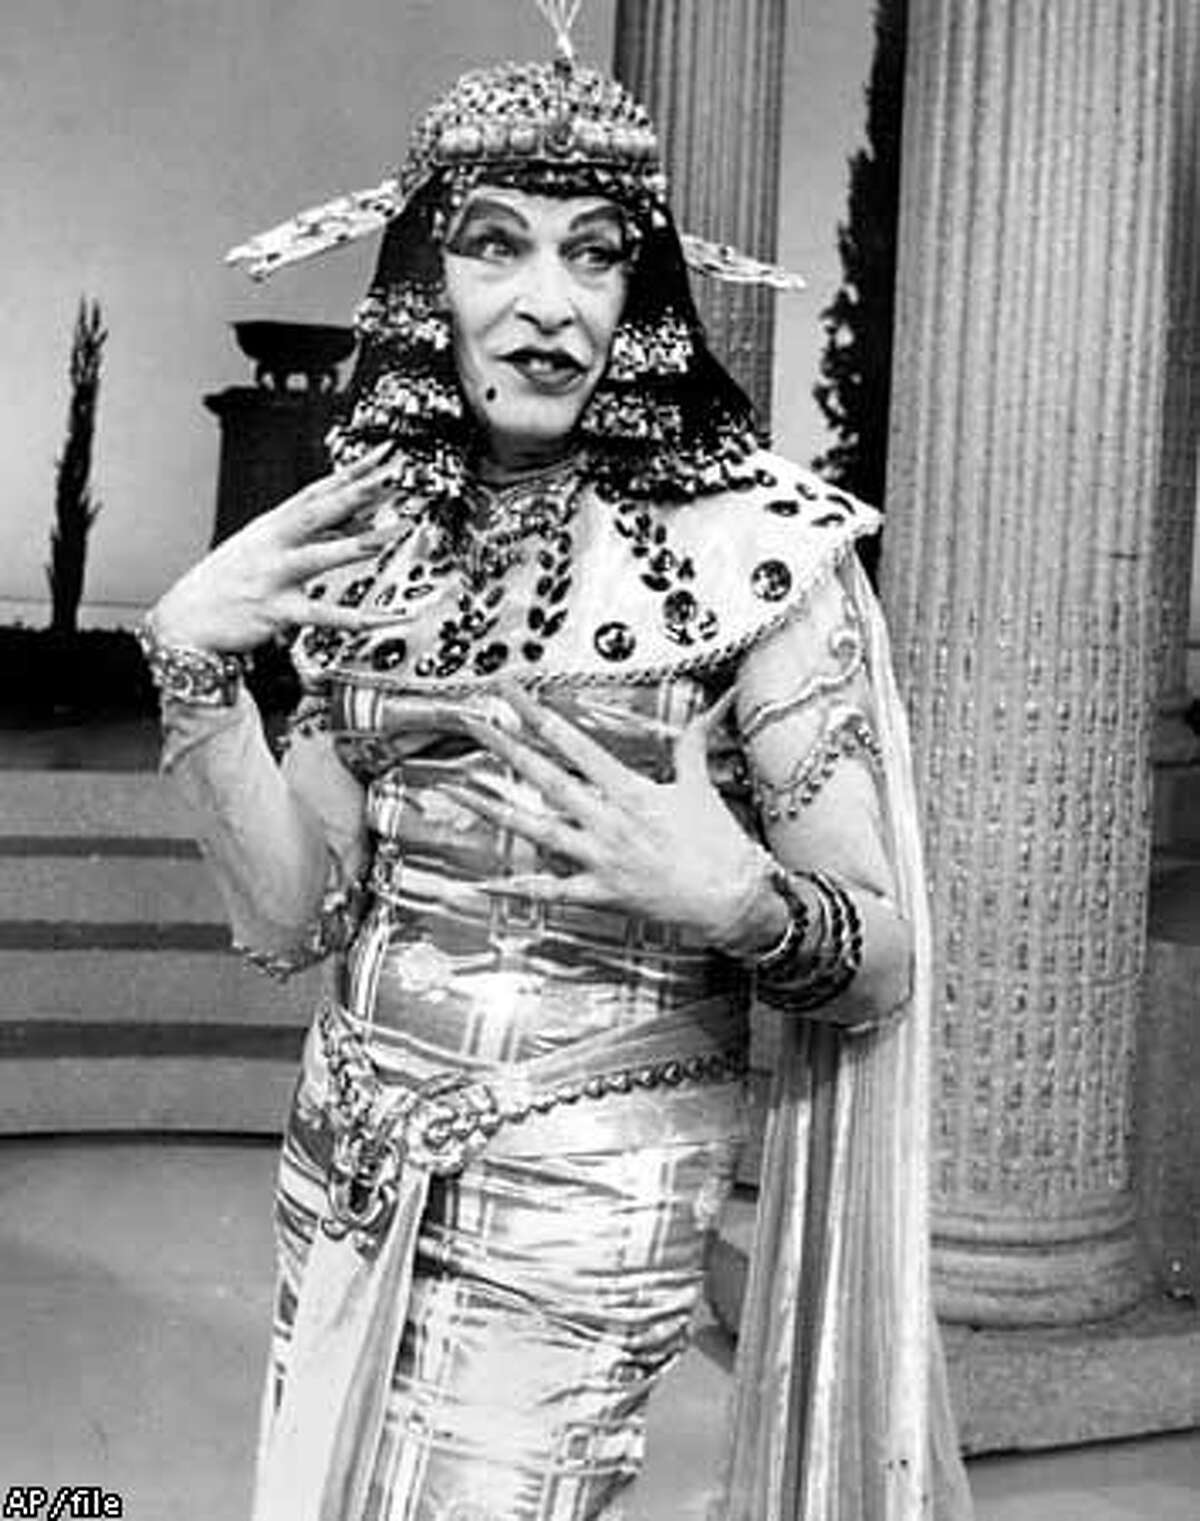 Comedian Milton Berle is the siren of the Nile during "The Milton Berle Show" on Feb. 6, 1962. Berle, the acerbic, cigar-smoking vaudevillian who eagerly embraced a new medium and became ``Mr. Television'' in the dawn of the video age, died Wednesday, March 27, 2002, a spokesman said. He was 93. Berle died at 2:45 p.m. at his home after a lengthy illness, publicist Warren Cowan said. Berle's wife, Lorna, and several family members were at his side. (AP Photo)